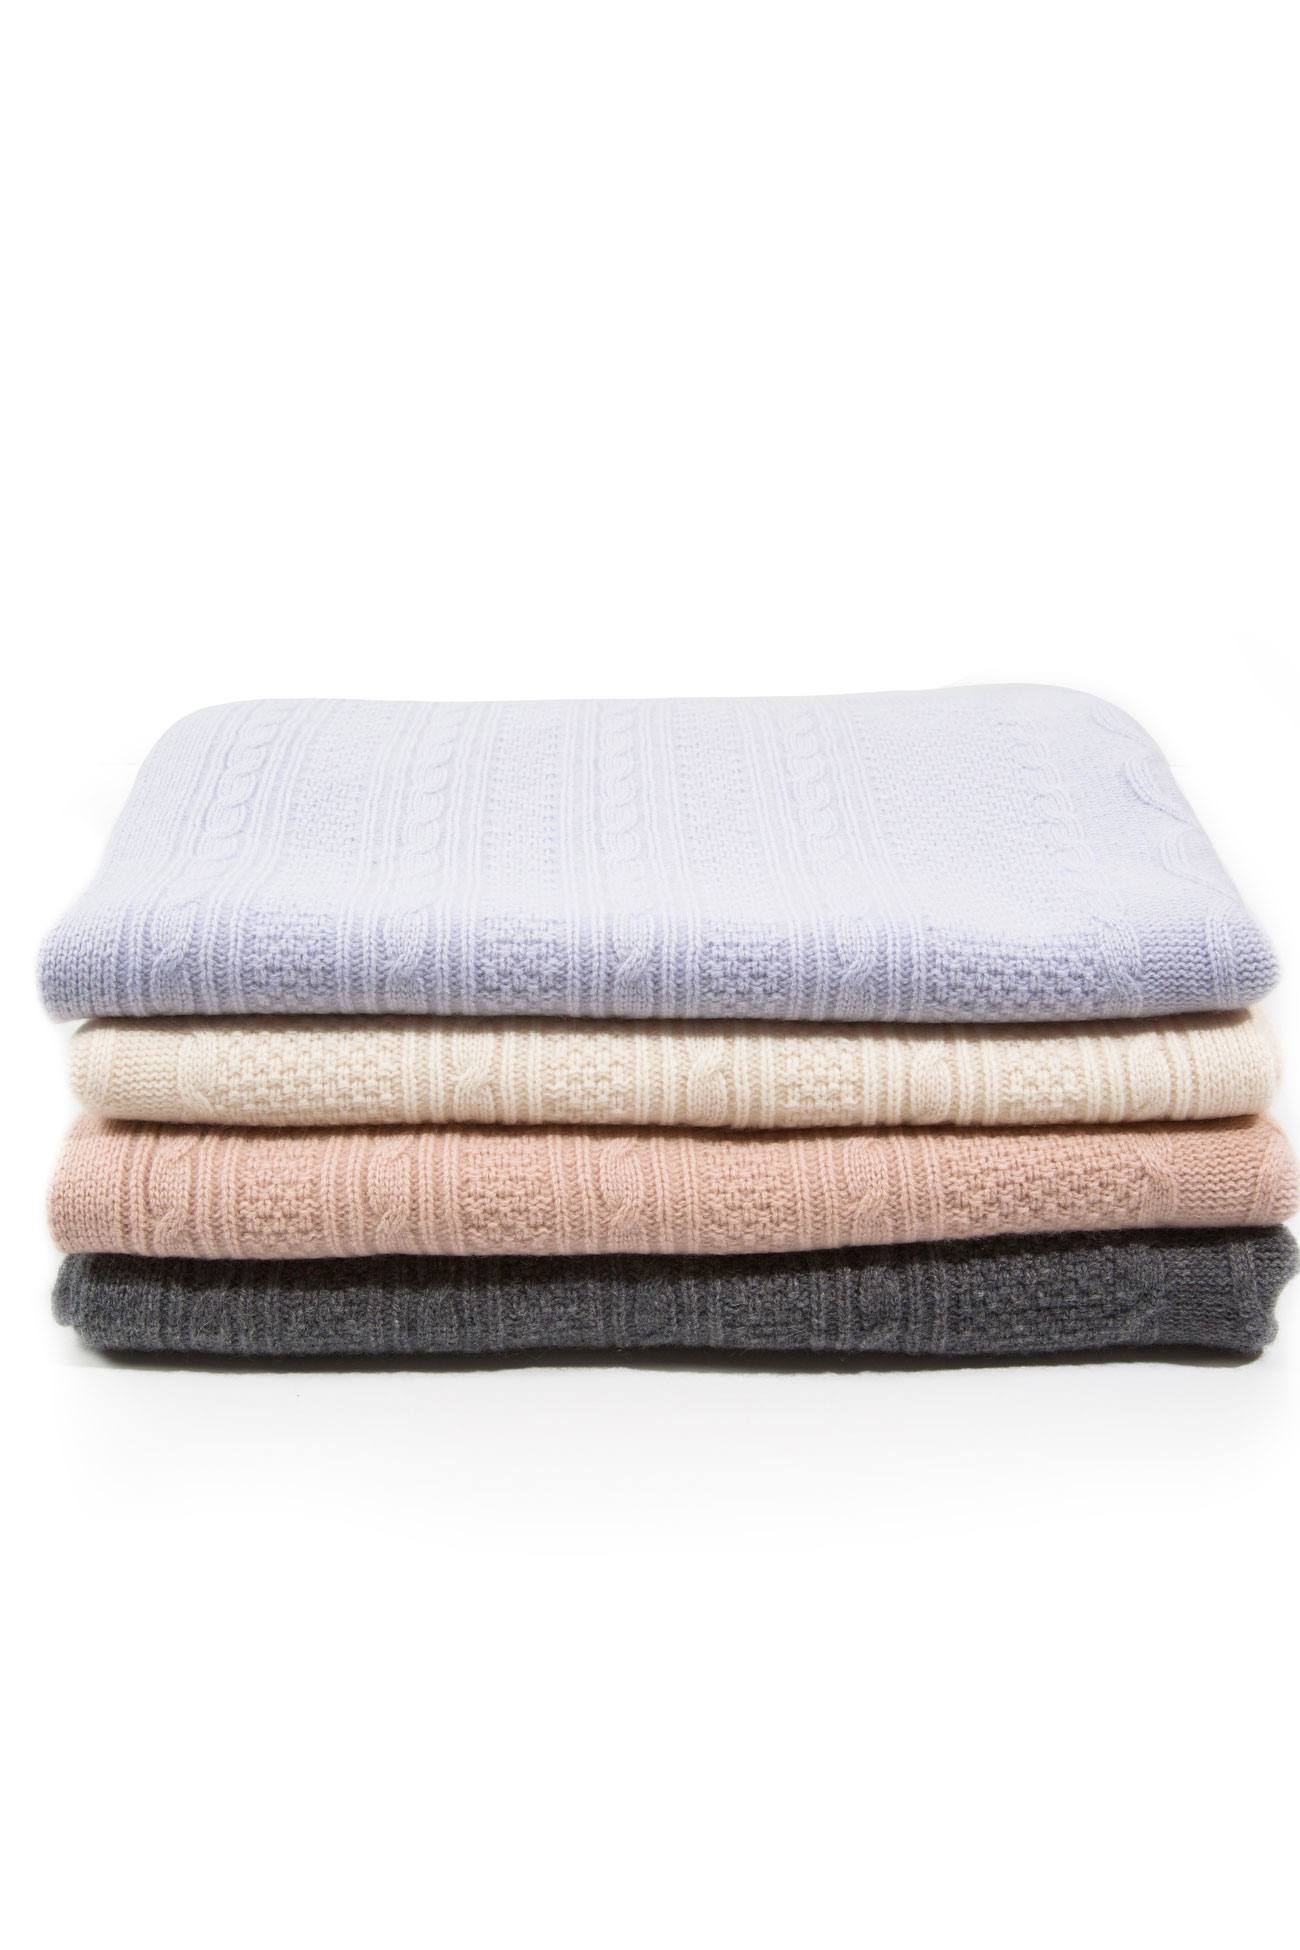 Cashmere Baby Blanket Cable Knit NakedCashmere